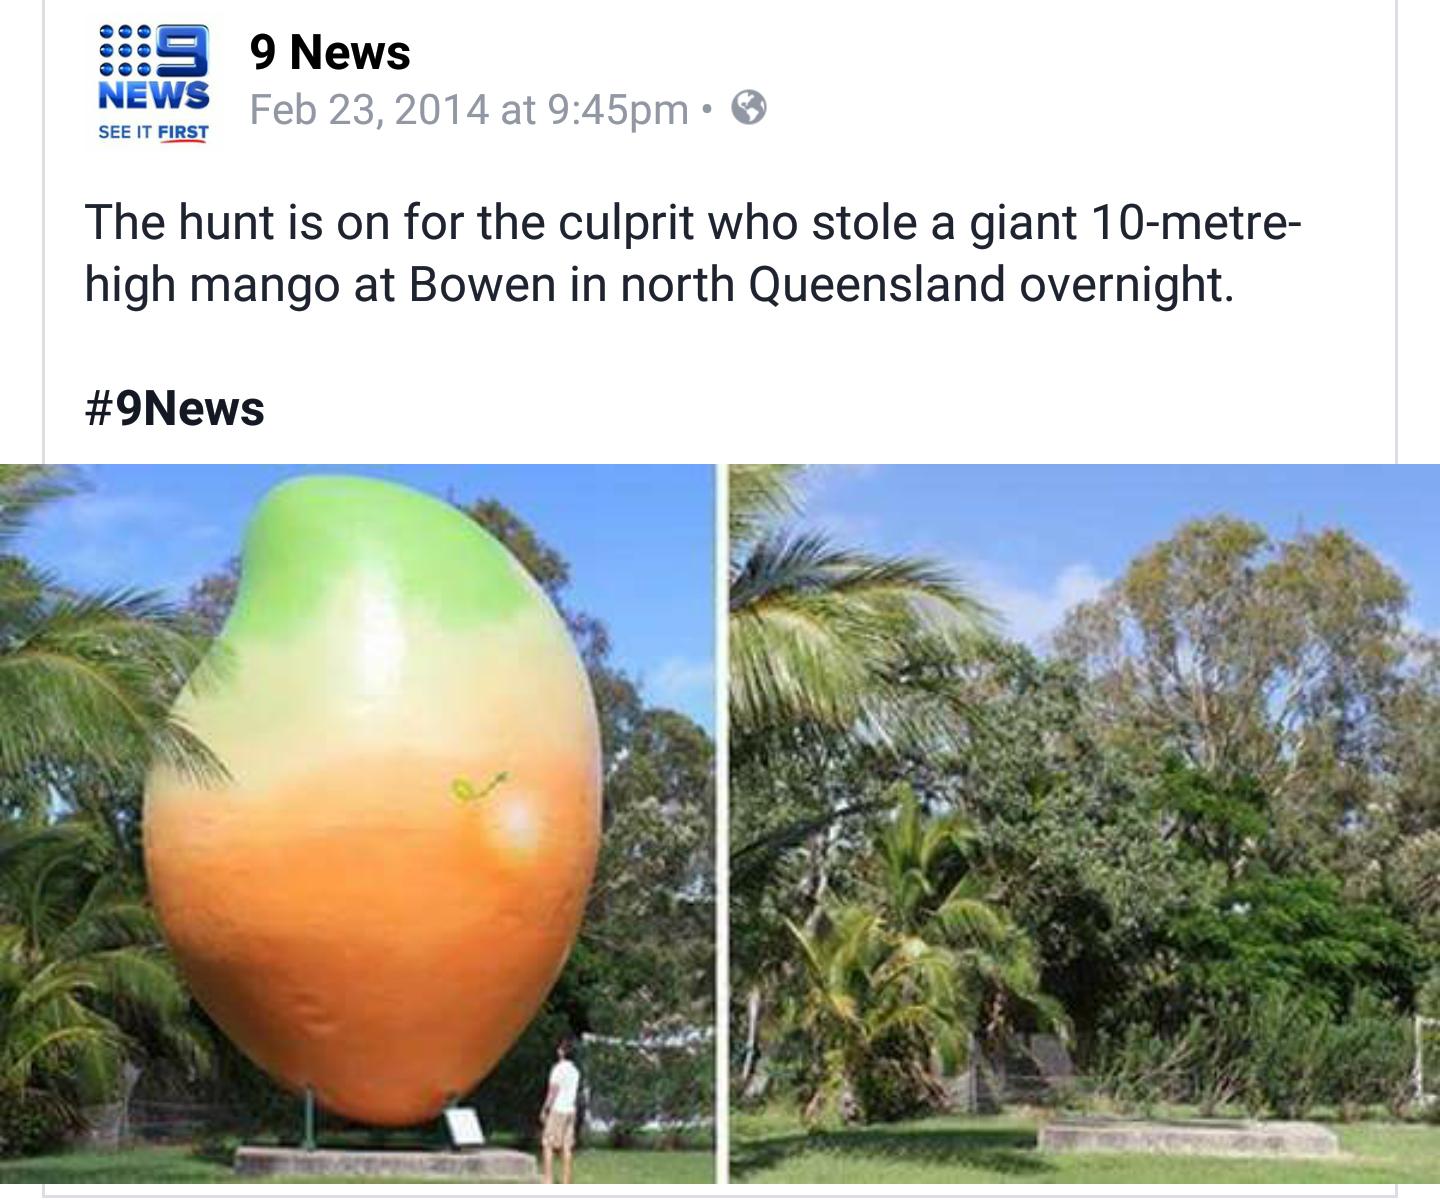 big mango australia - 3 News 9 News at pm See It First The hunt is on for the culprit who stole a giant 10metre high mango at Bowen in north Queensland overnight.